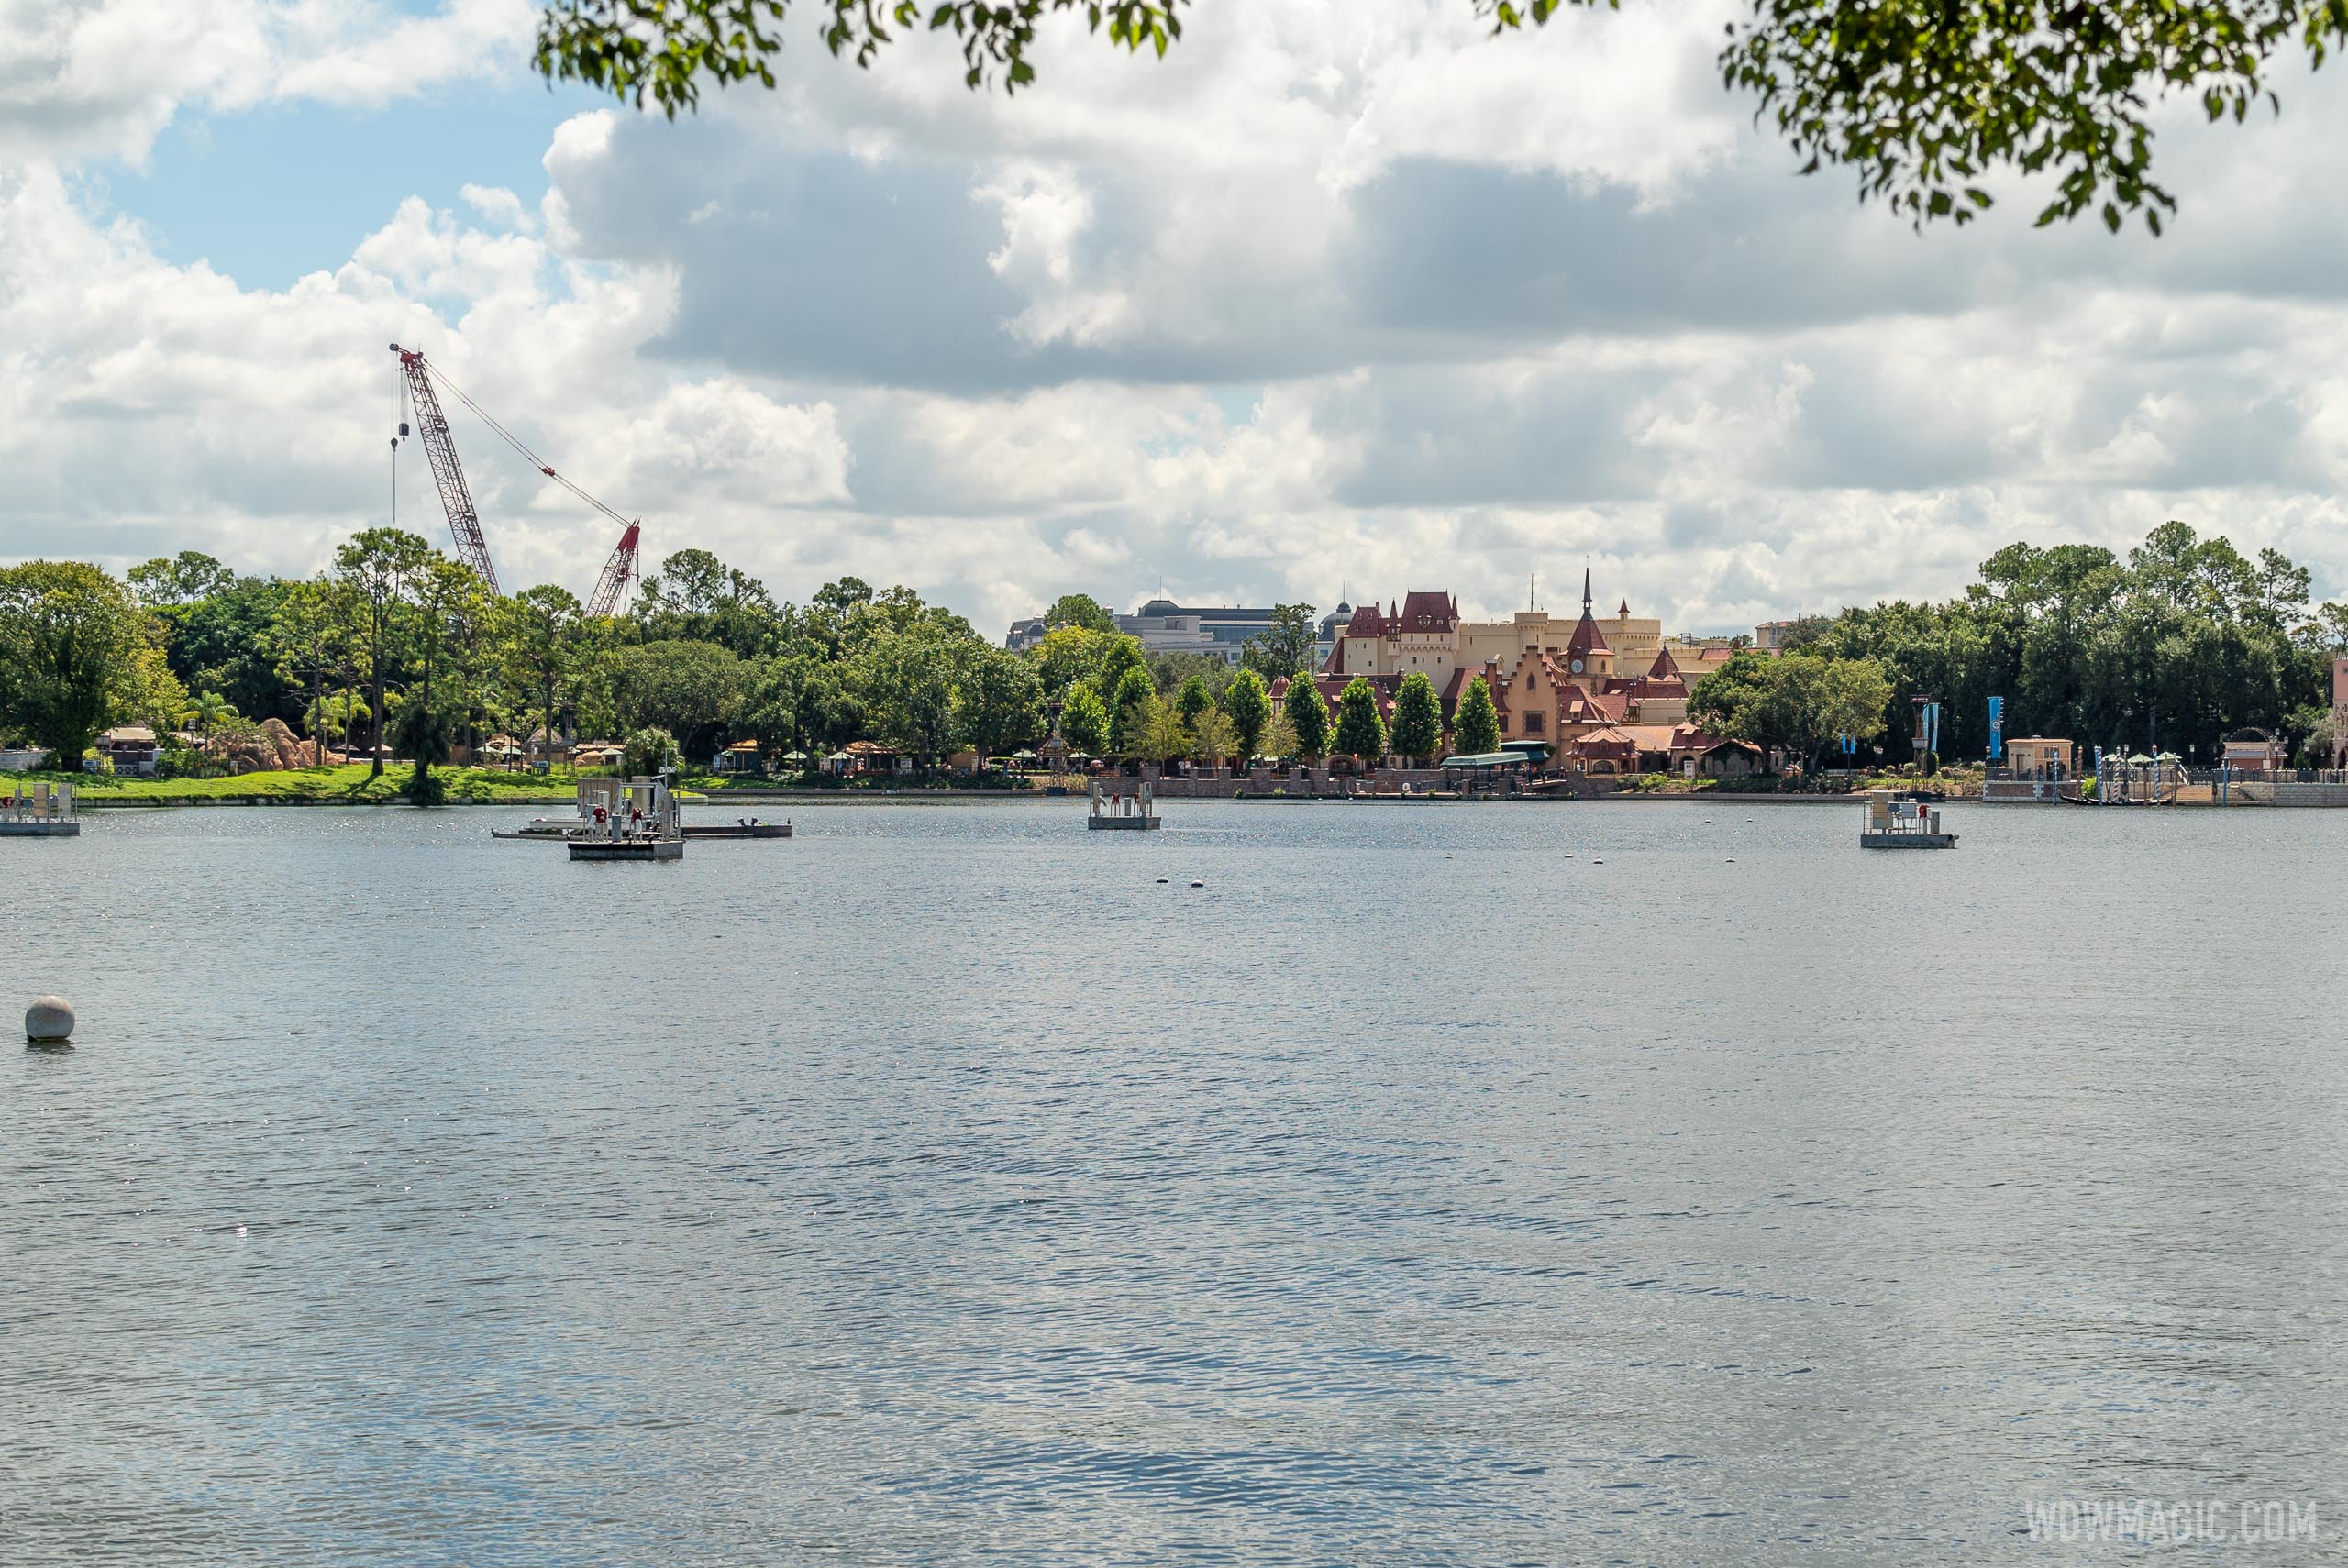 Expect more work in World Showcase Lagoon as new permit filed for Harmonious construction